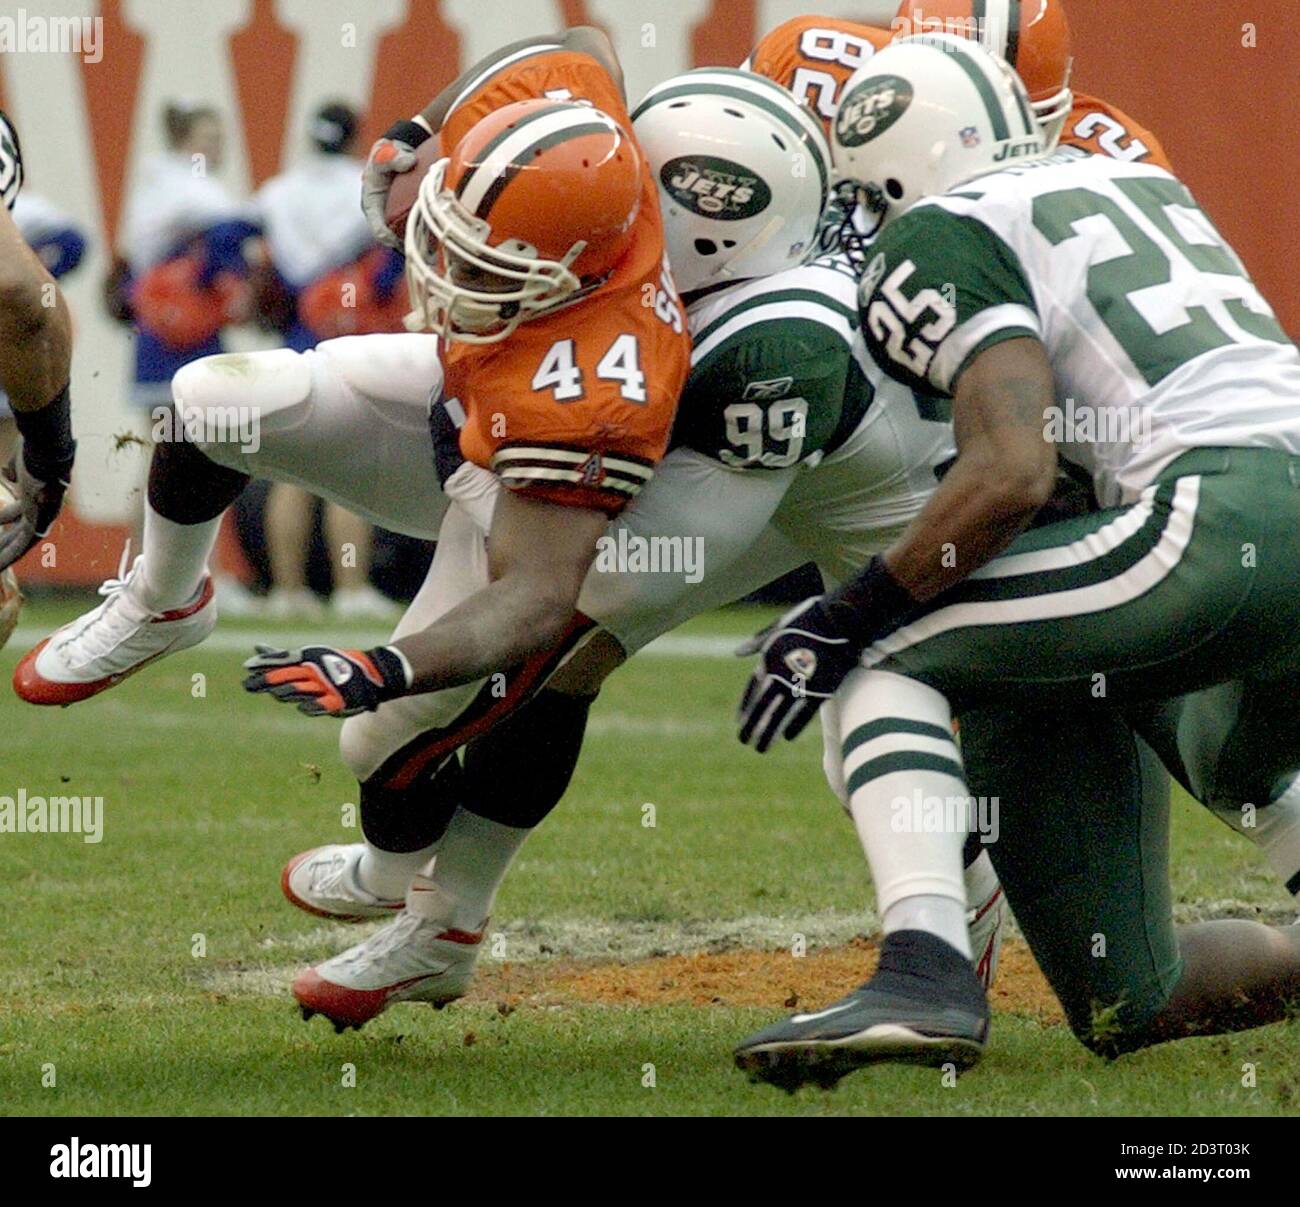 Cleveland Browns Suggs picks up a few yards before being stopped by Thomas  and Tongue of the New York Jets in Cleveland. Cleveland Browns running back Lee  Suggs (L) picks up a